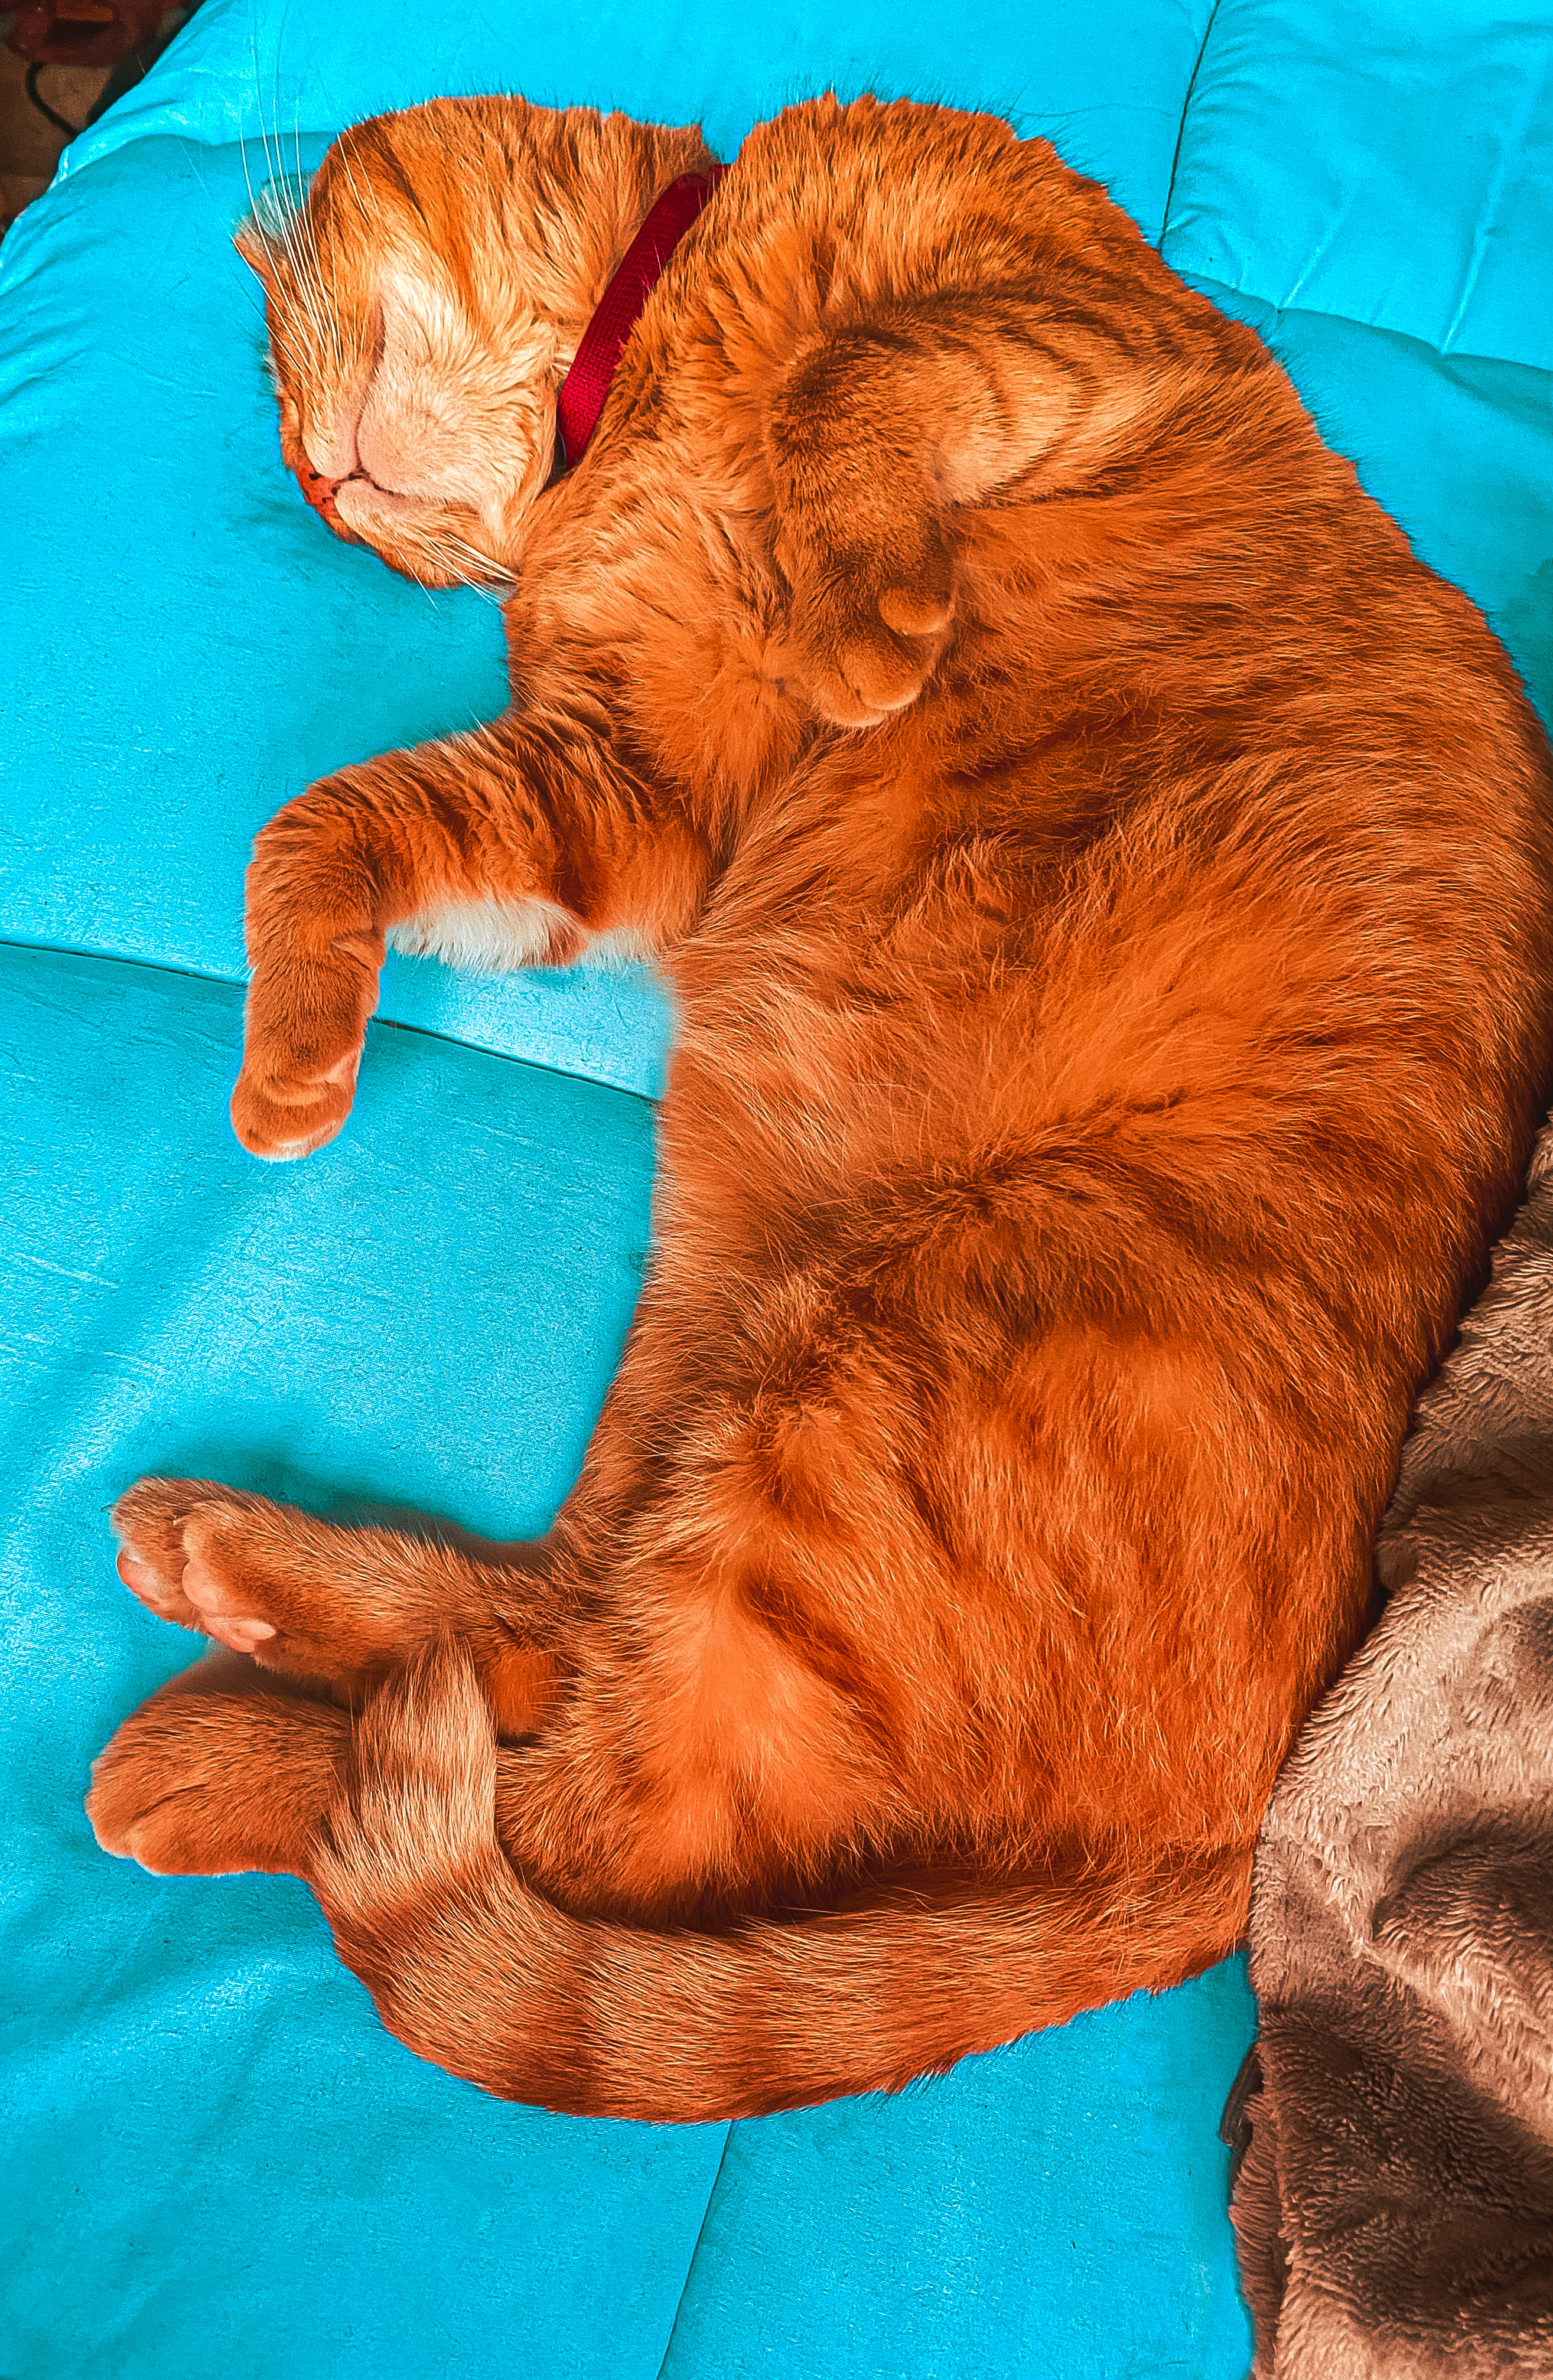 a picture of an orange cat sleeping on a blue blanket